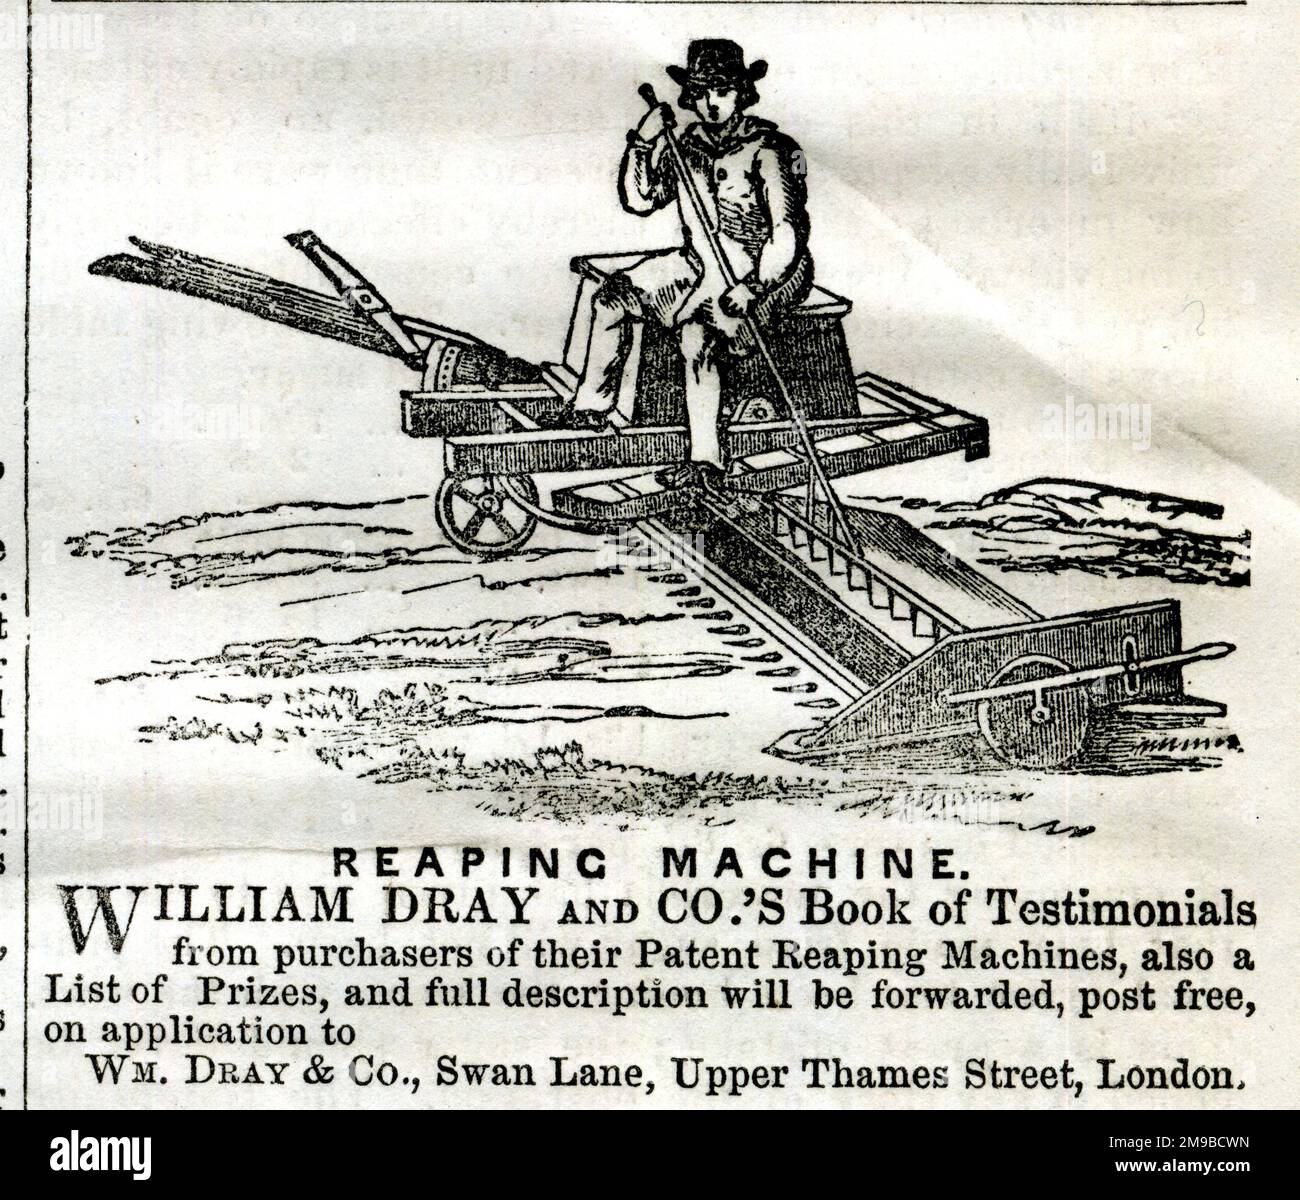 Advert, William Dray and Co, Upper Thames Street, Londra, Patent Reaping Machine Foto Stock